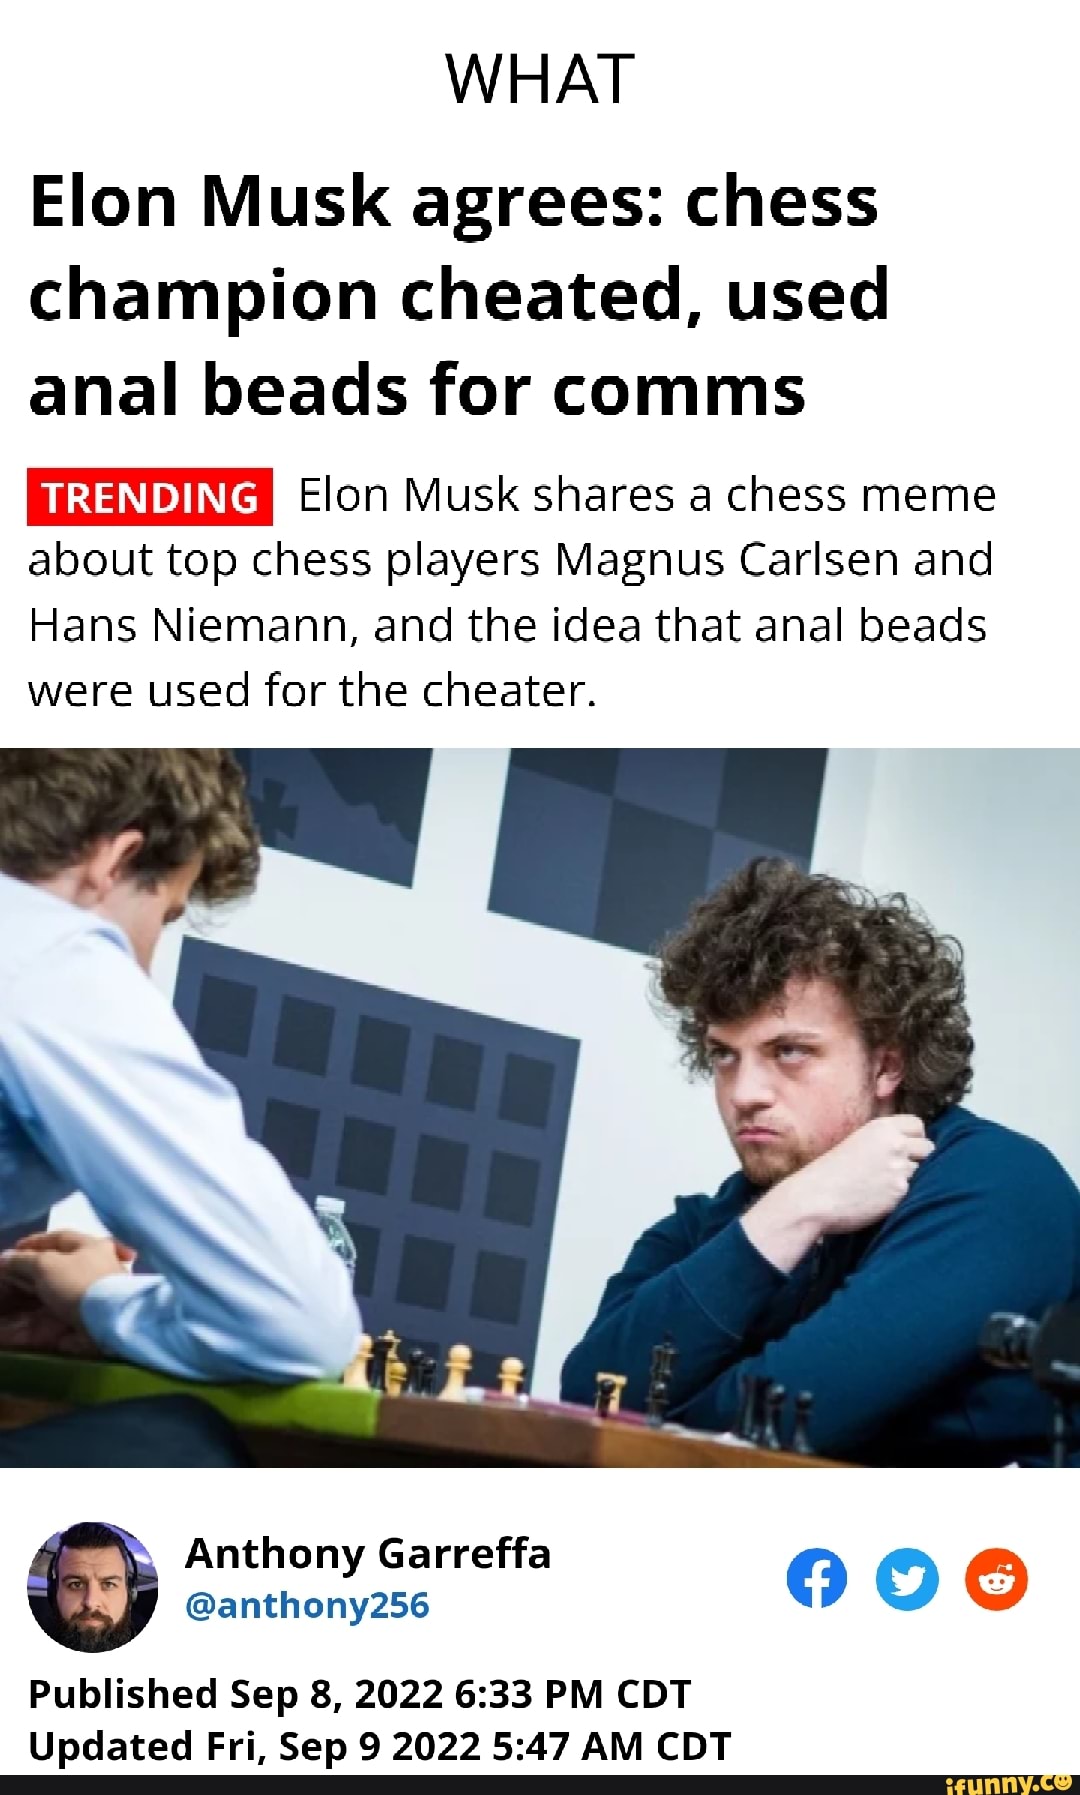 Elon Musk agrees: chess champion cheated, used anal beads for comms